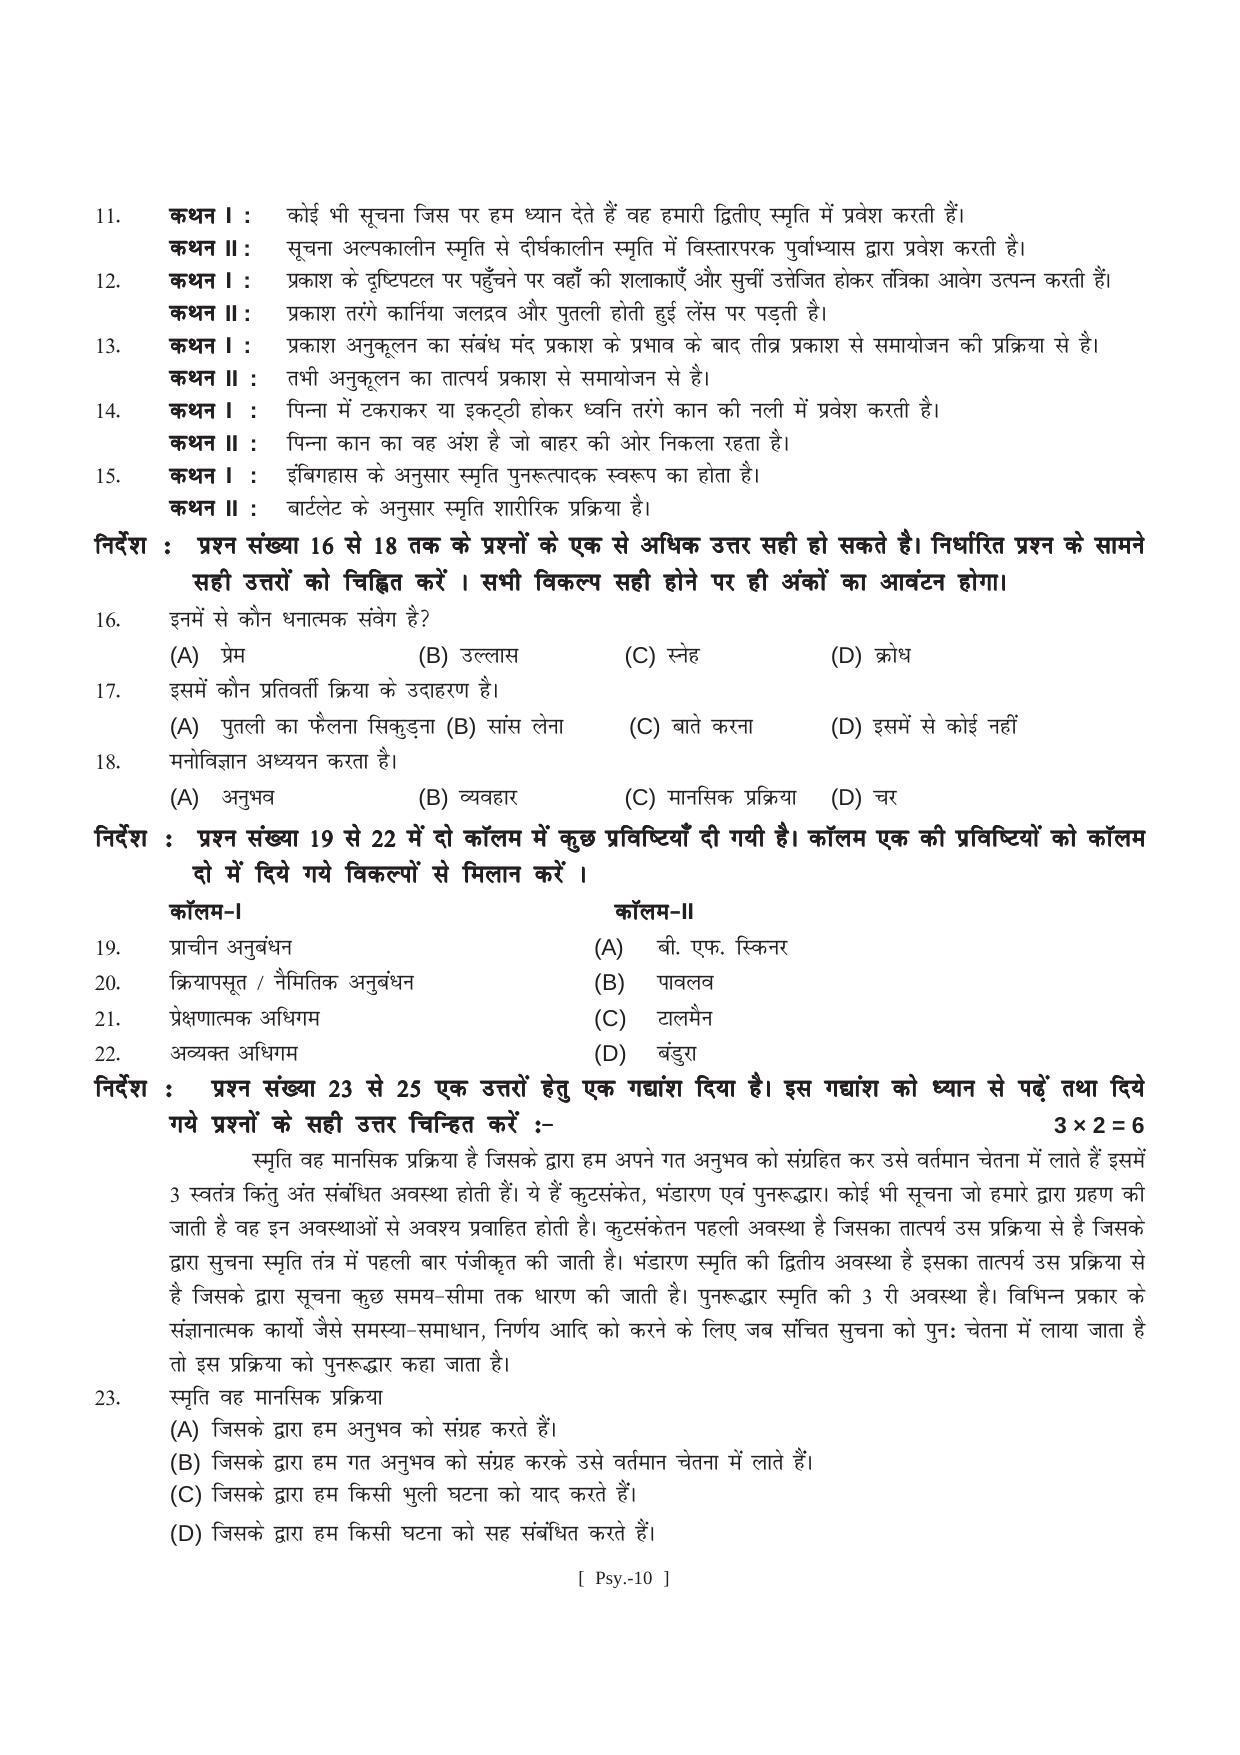 Bihar Board Class 11 Psychology (All Groups) Model Paper - Page 10